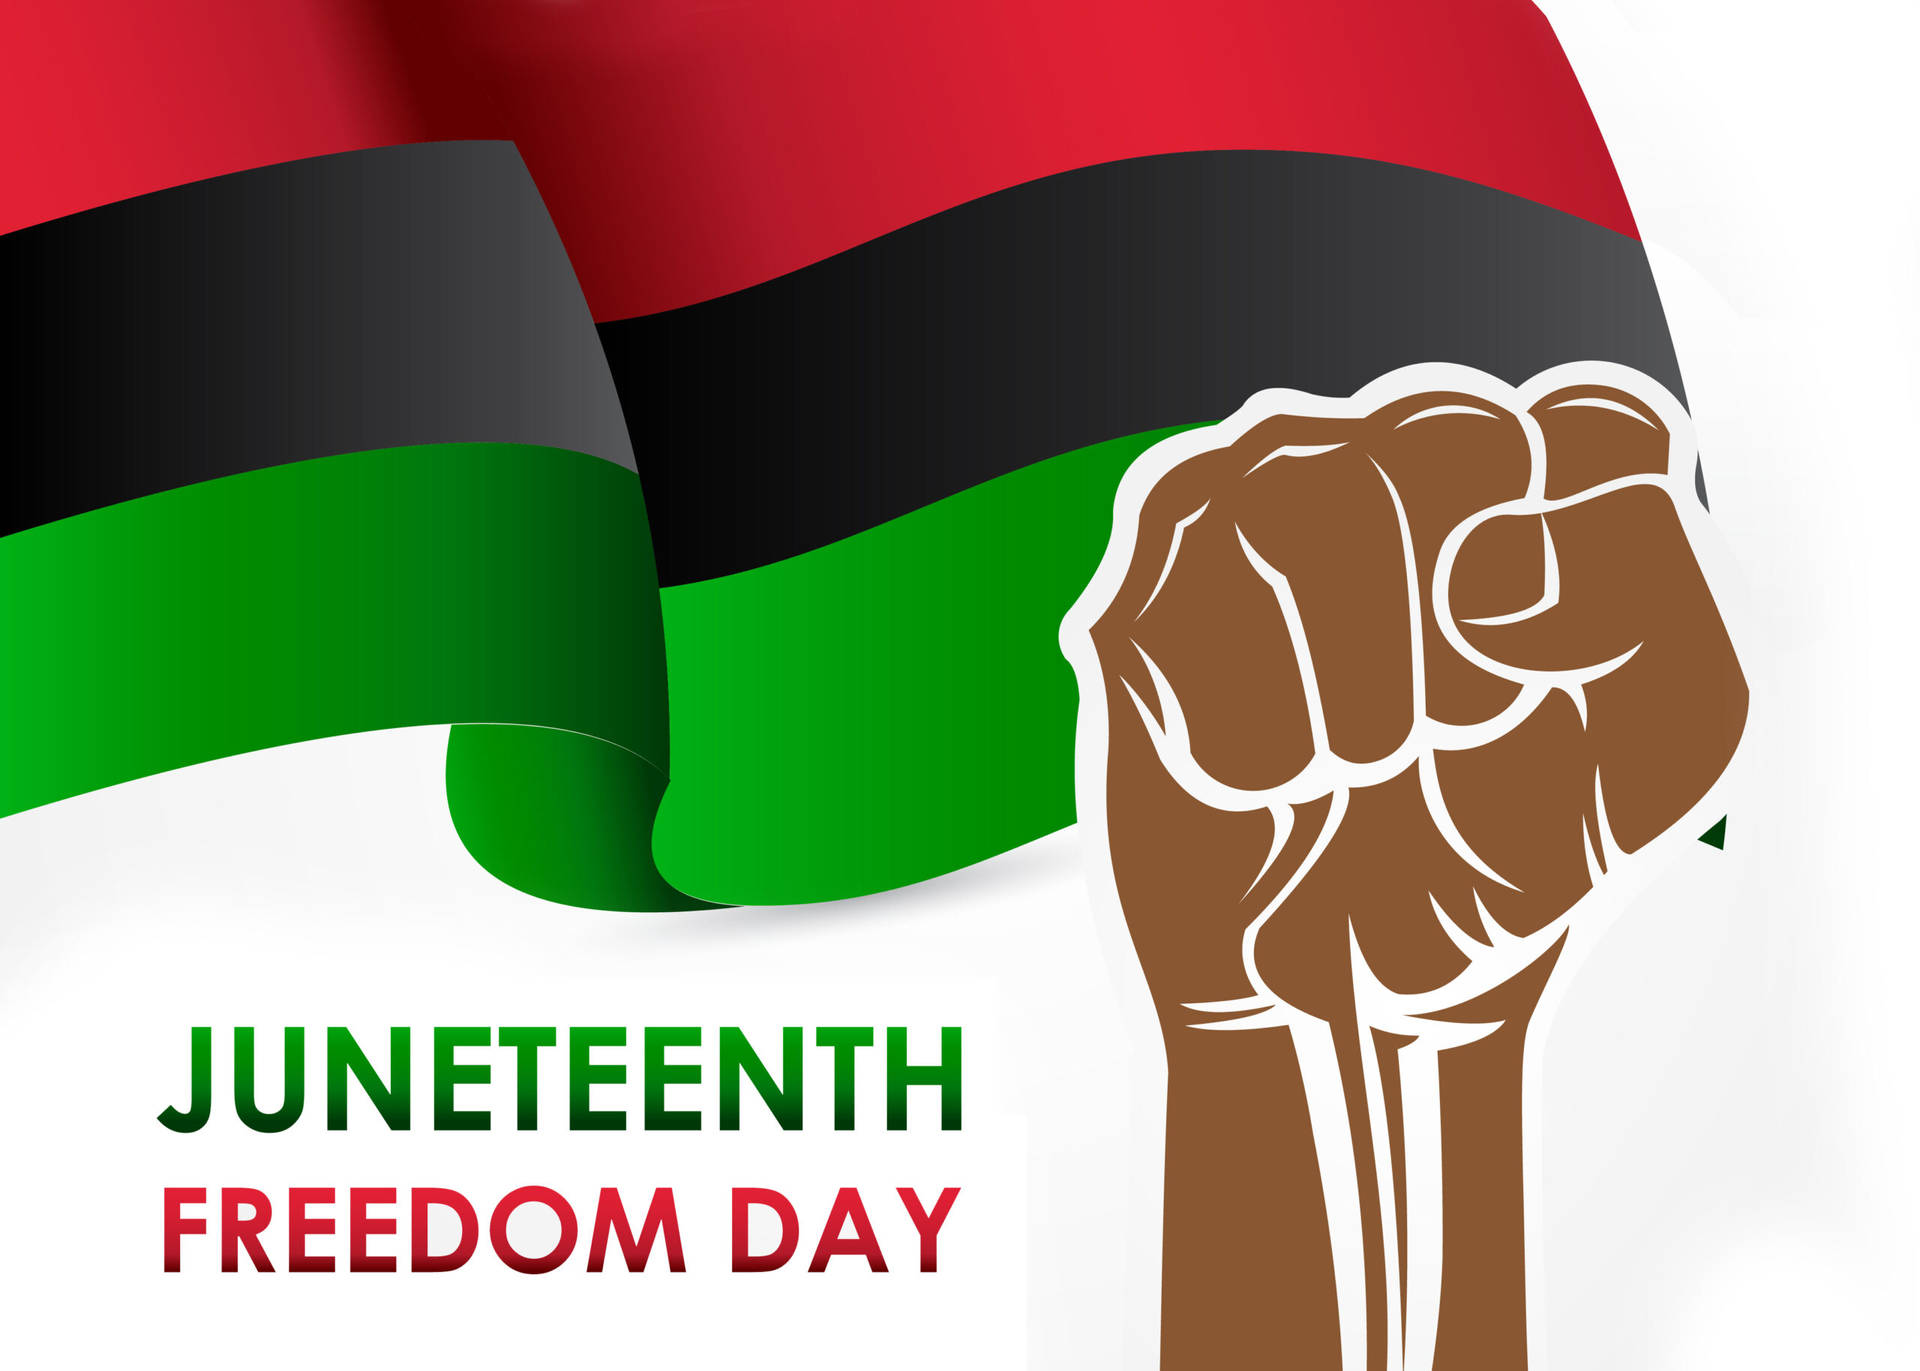 Juneteenth Freedom Day Background